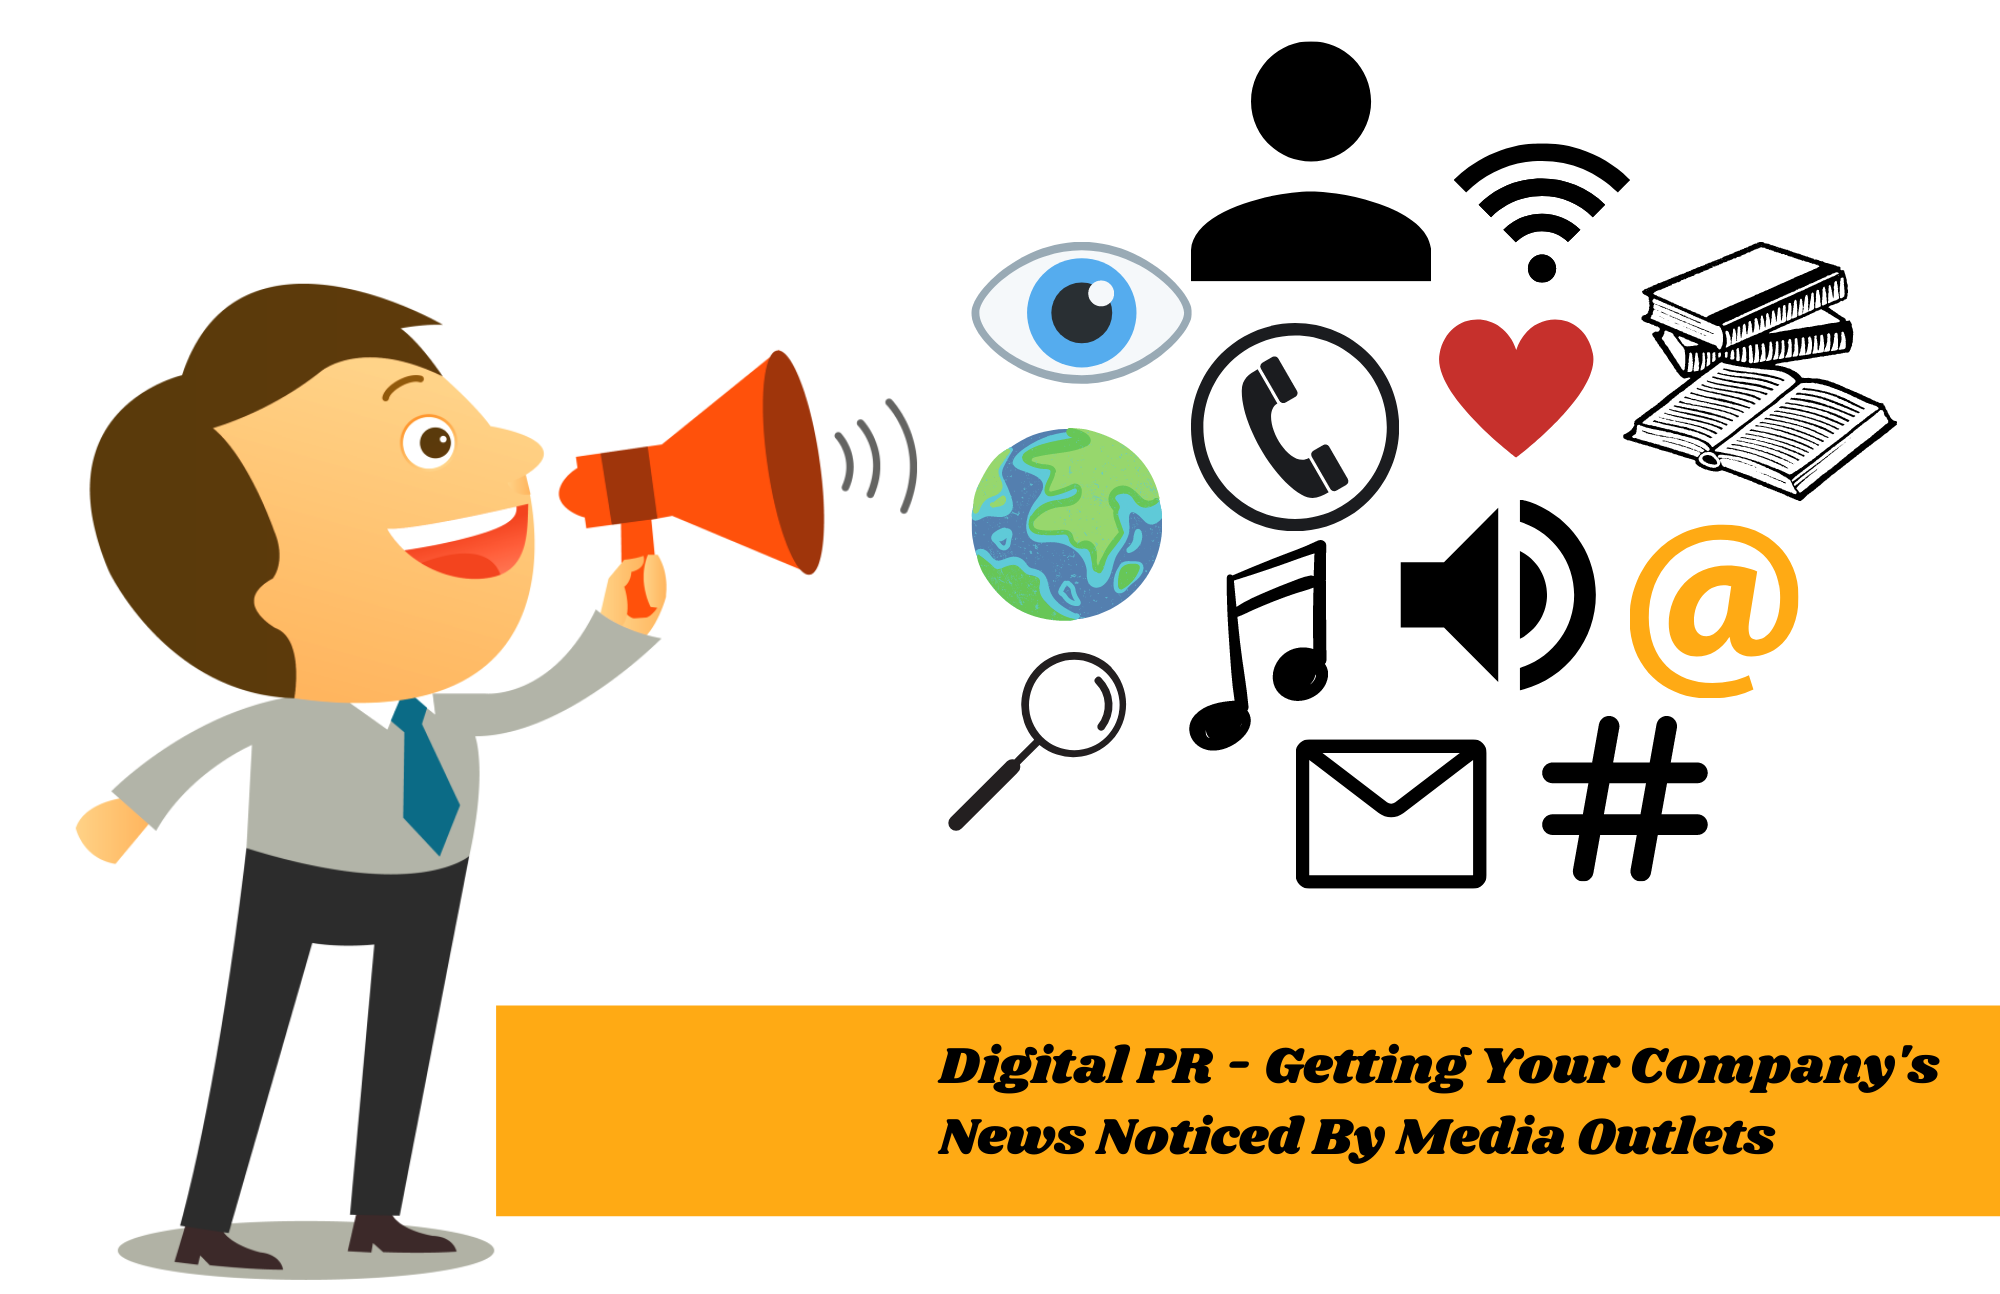 Digital PR - Getting Your Company's News Noticed By Media Outlets